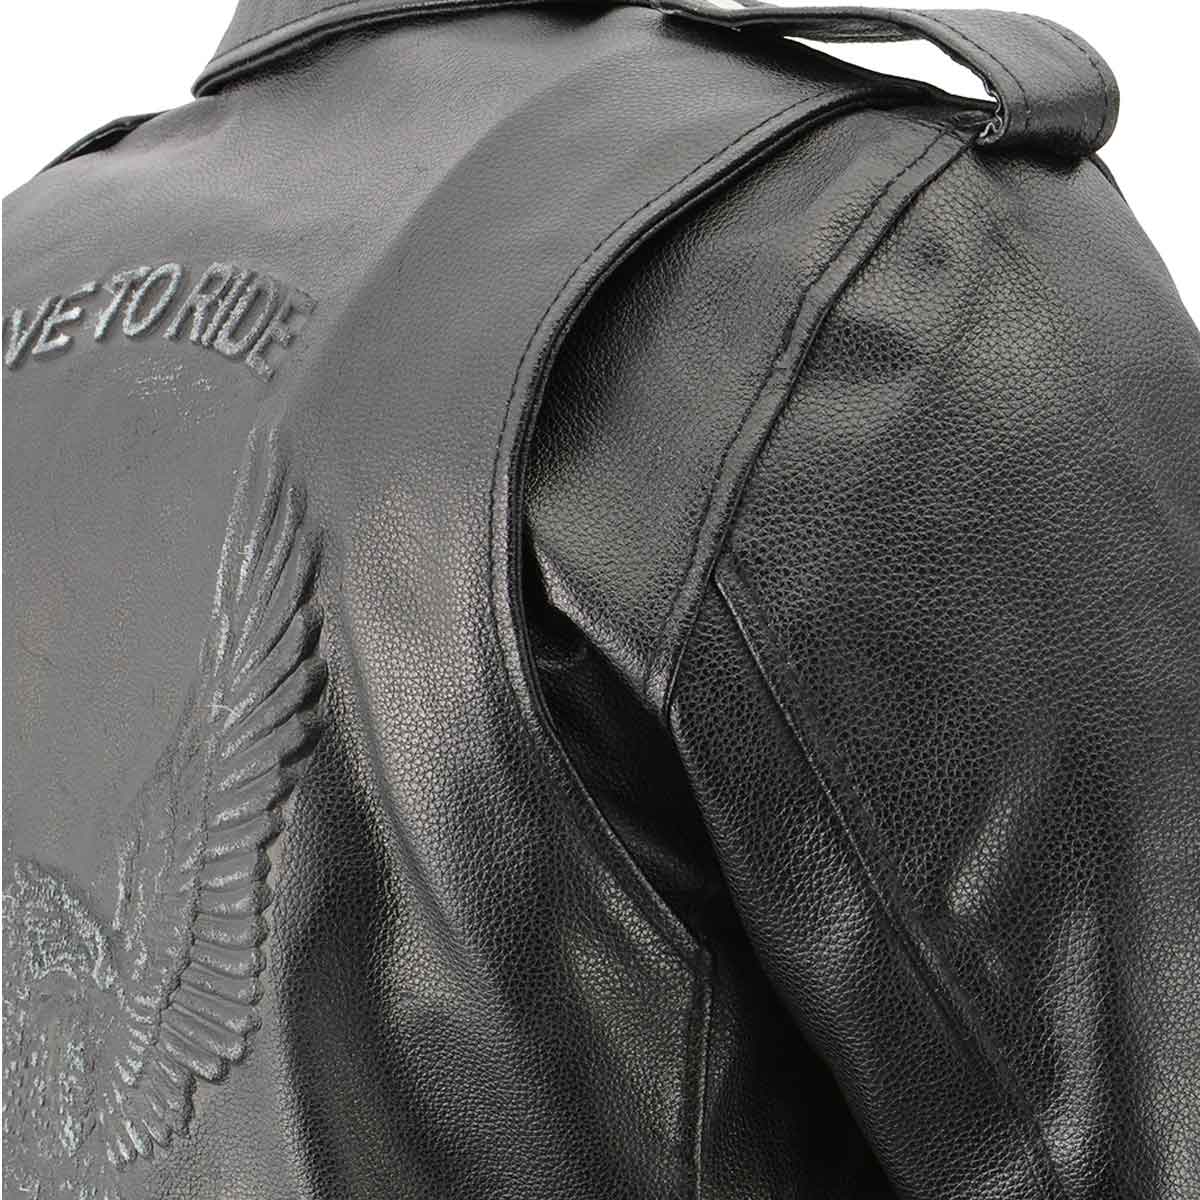 Men's XS703 Black Embossed 'Live to Ride, Ride to Live' Classic Motorcycle Jacket